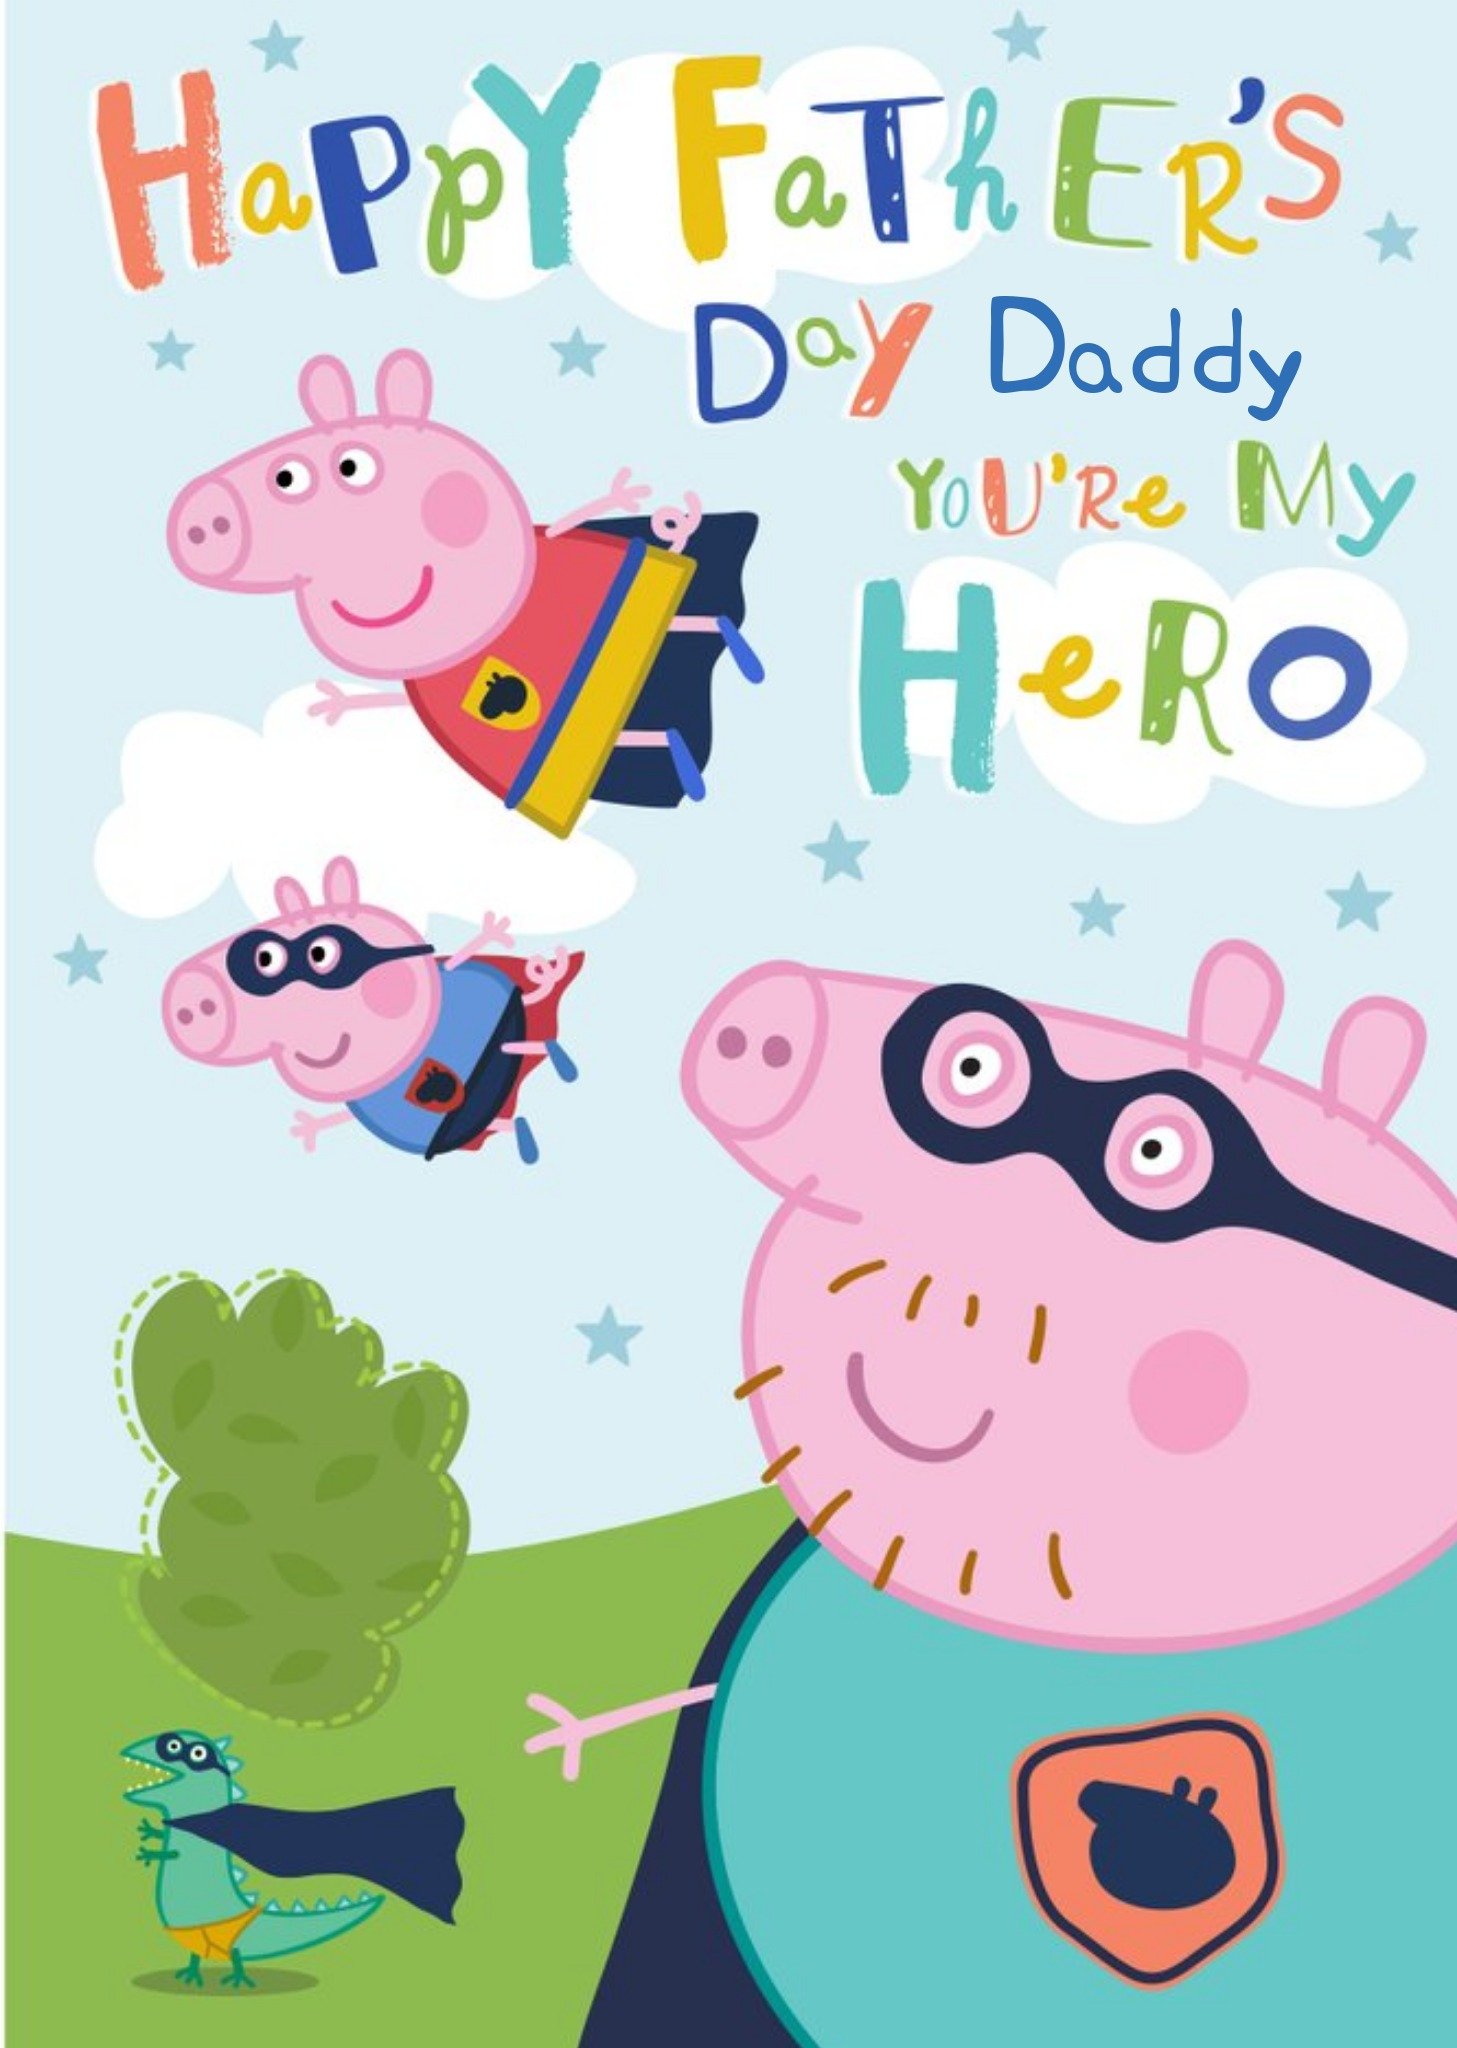 Peppa Pig Youre My Hero Fathers Day Card, Large